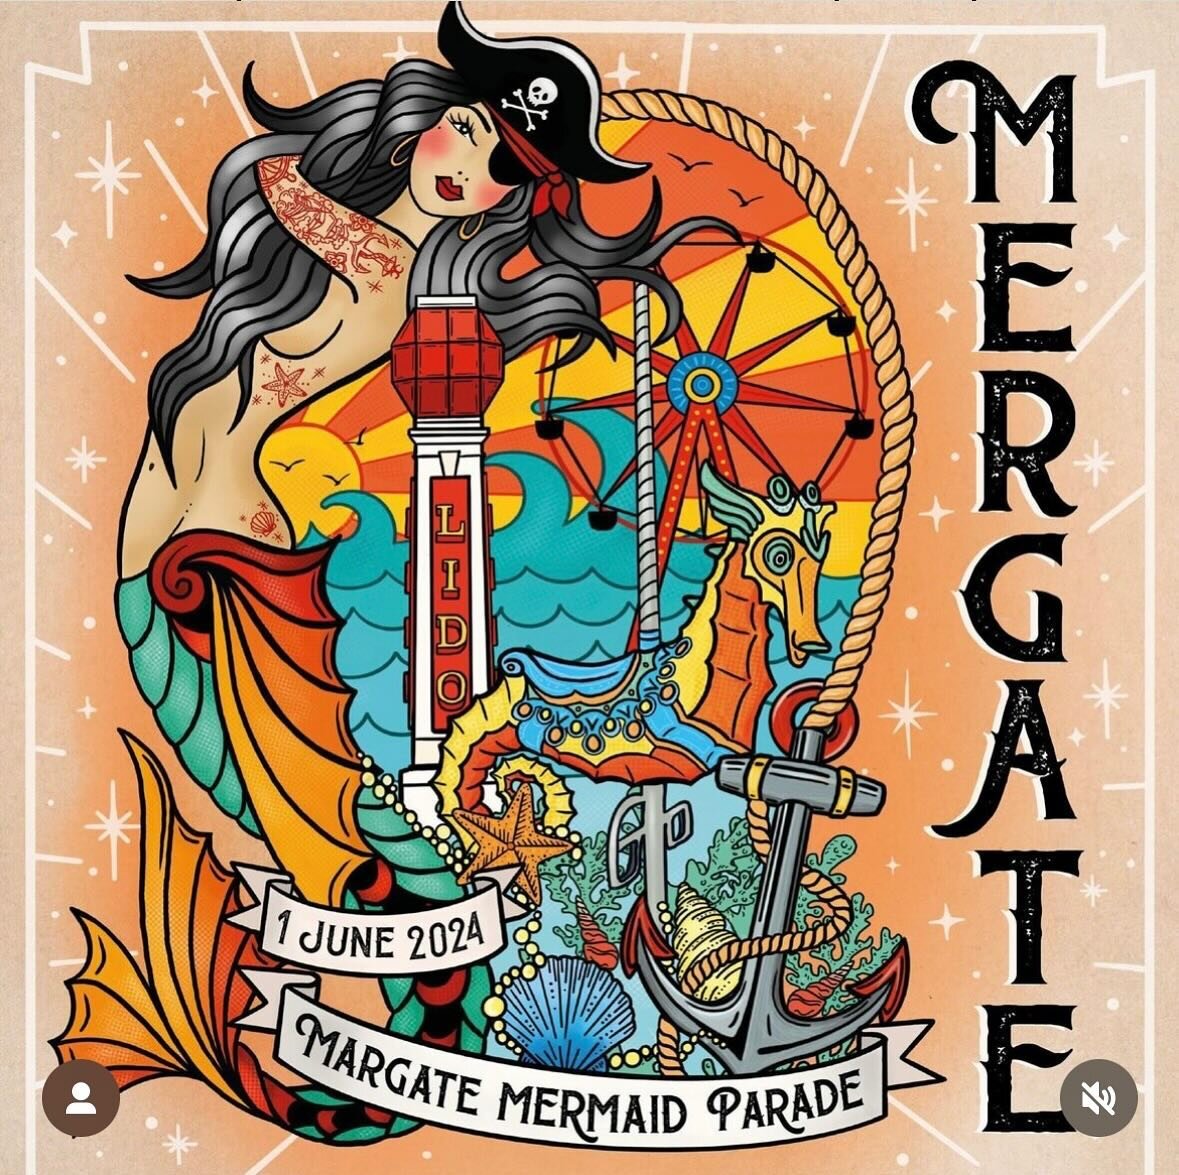 We&rsquo;re so excited to be one of the sponsors for @margate_mermaid_parade this year!! Take a look at their insta, where they explain what it&rsquo;s all about and how you can get involved. Lots of exciting things happening on the day and leading u